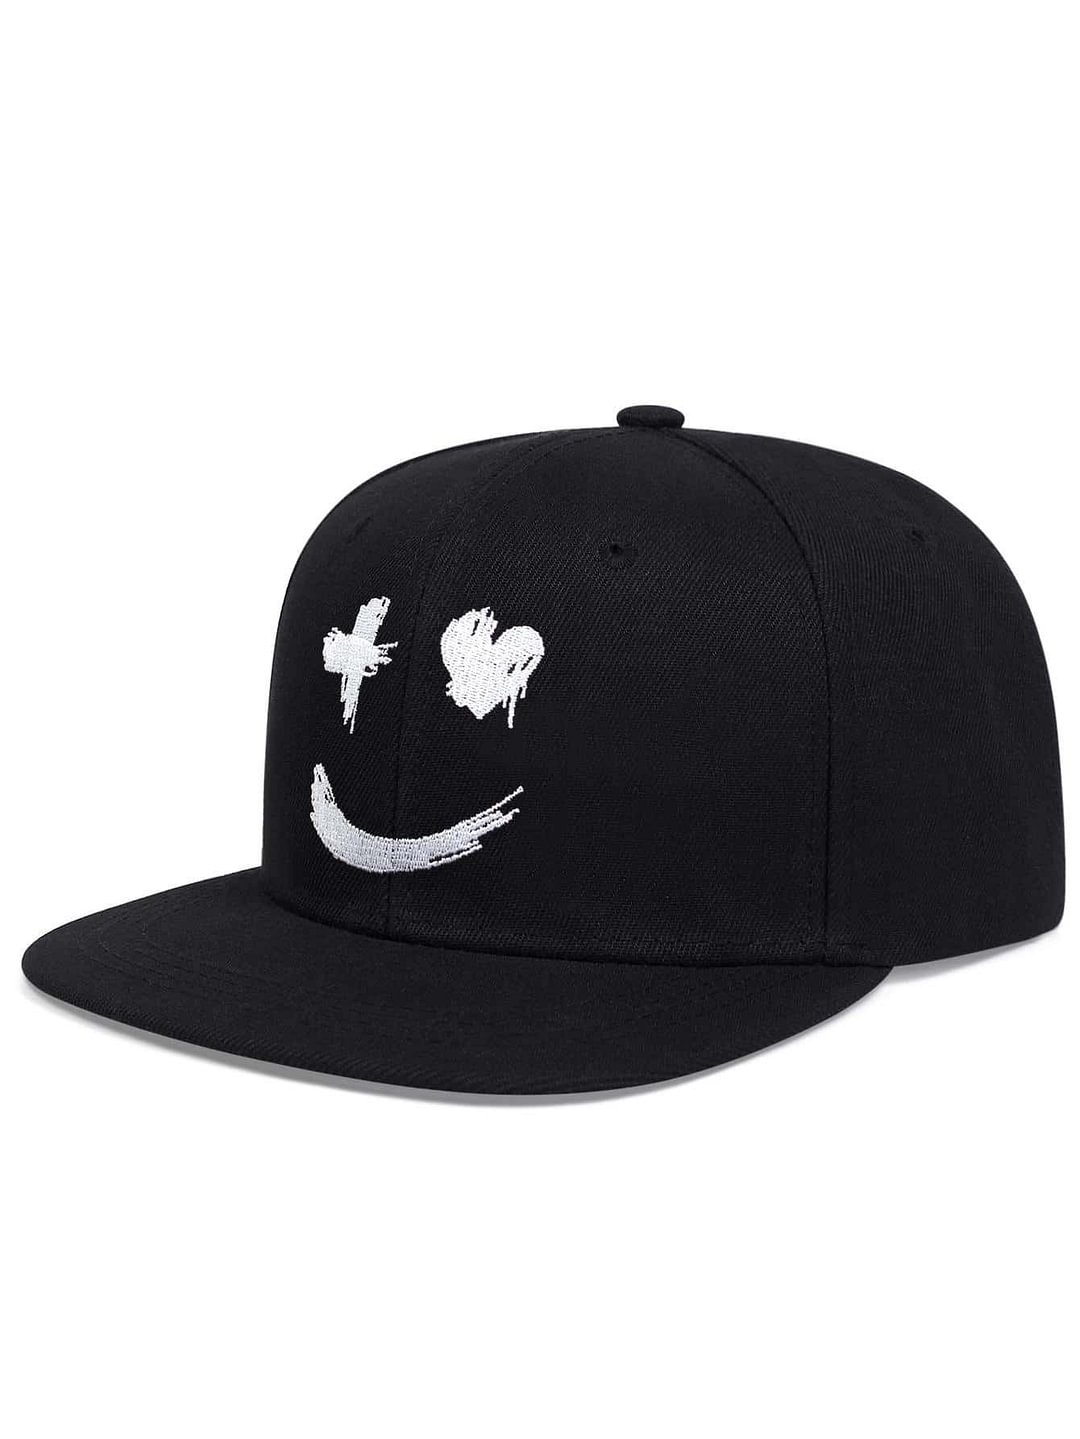 Lovely Graphic Fashion Cap